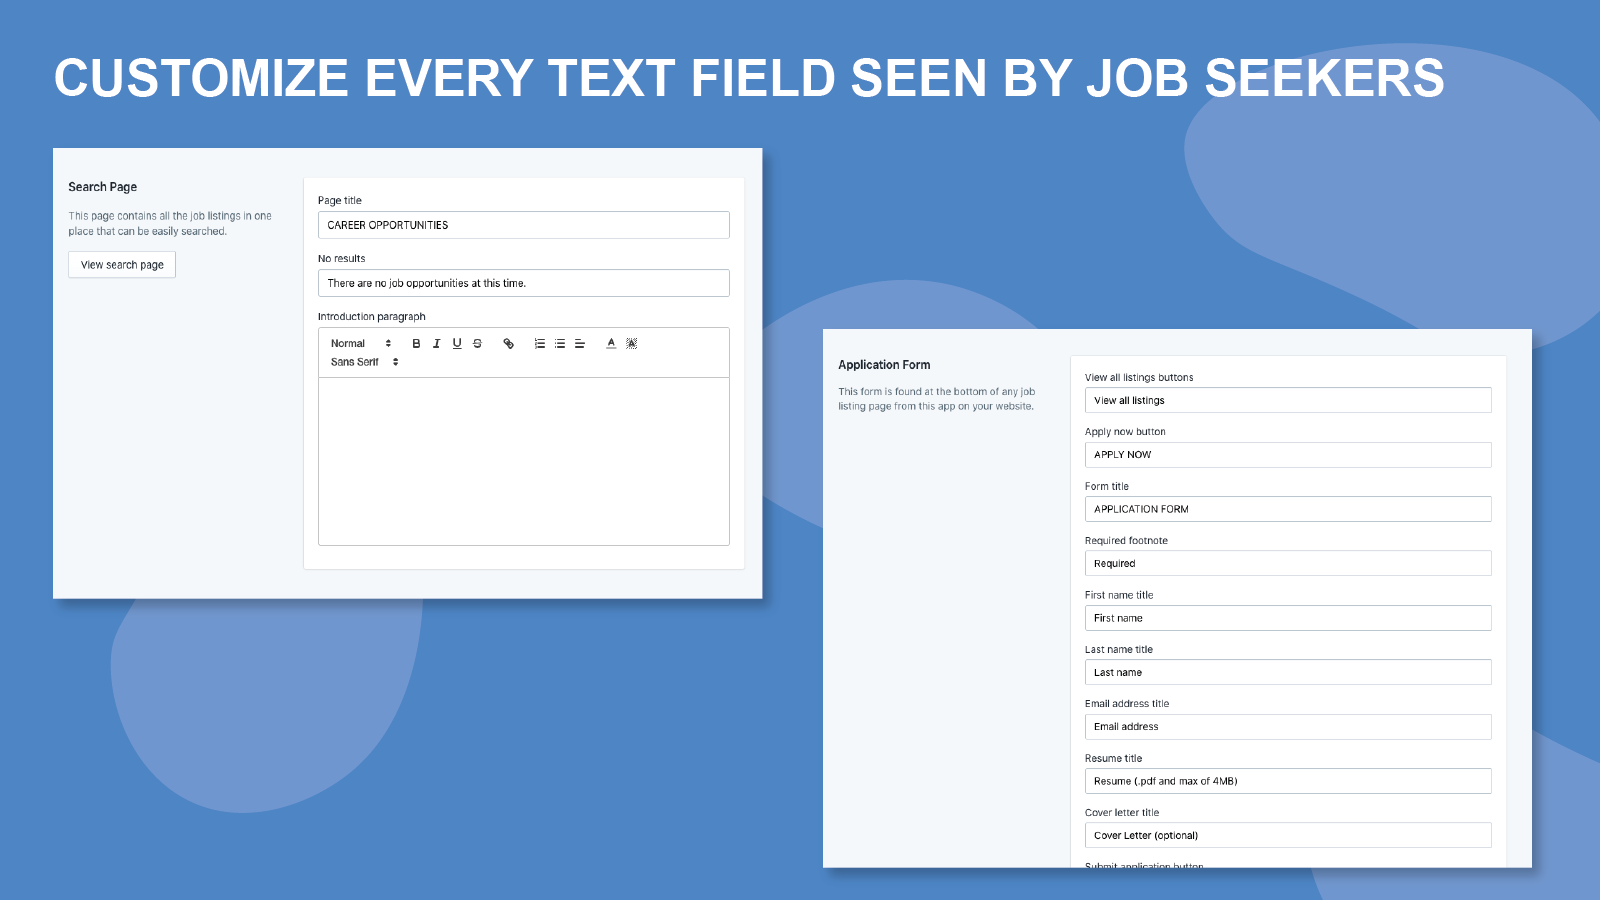 Customize every text field